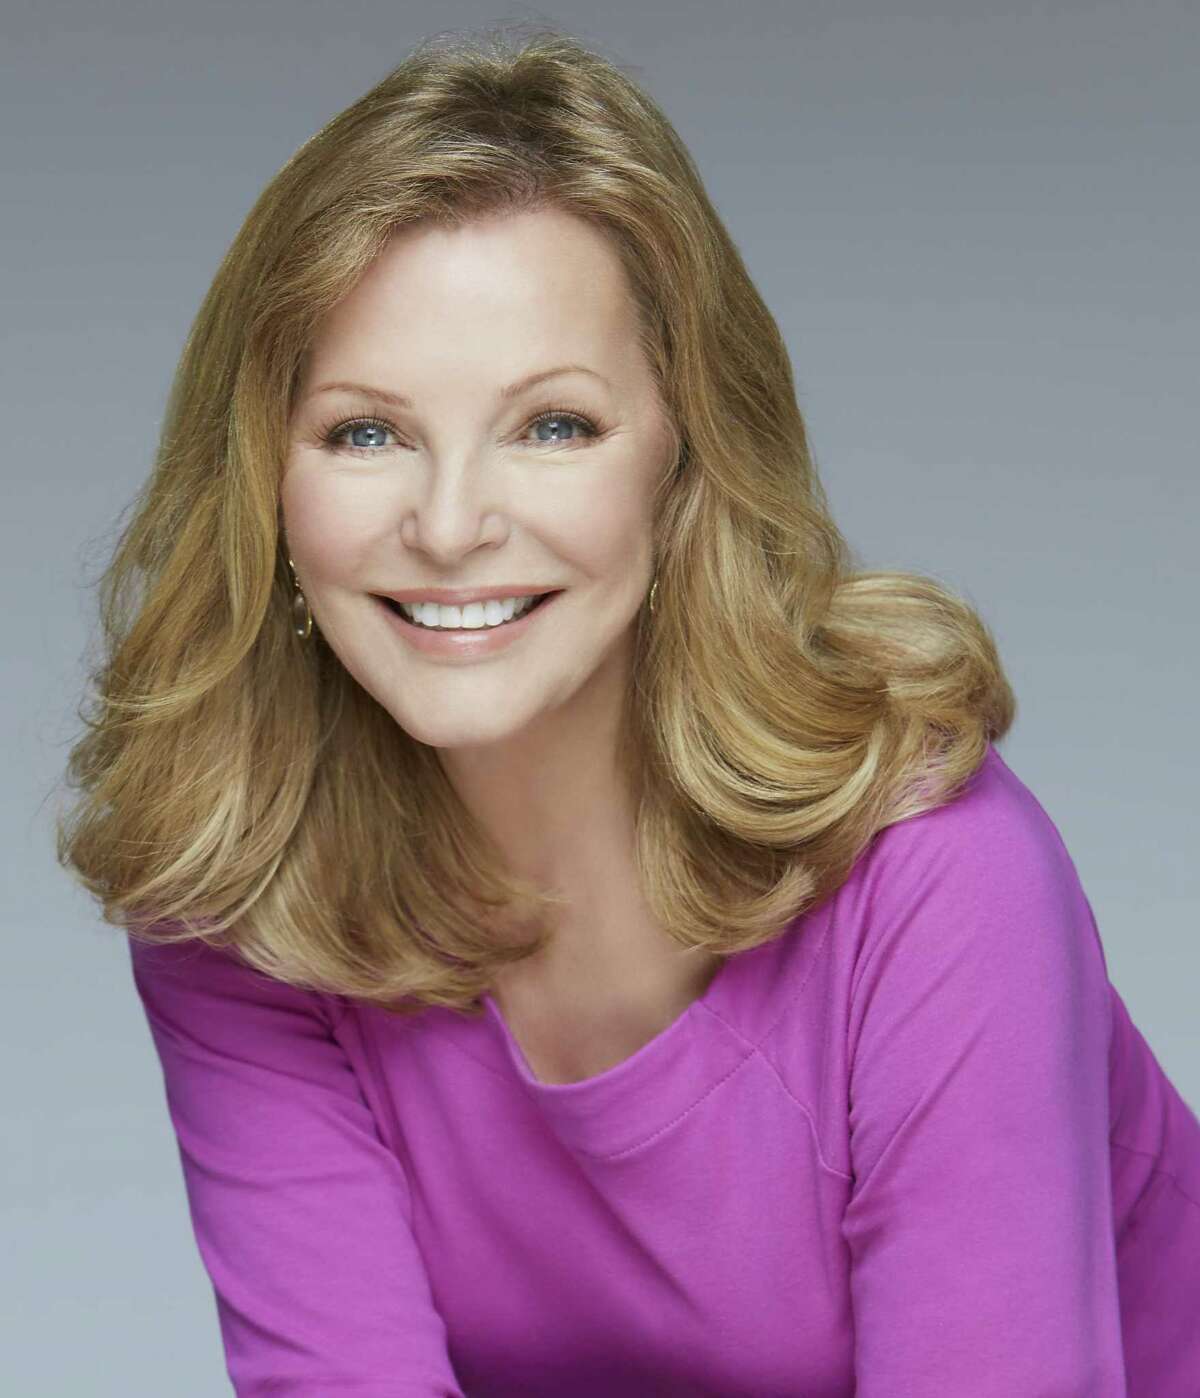 Cheryl Ladd to lead the Ford Holiday River Parade through the River Walk